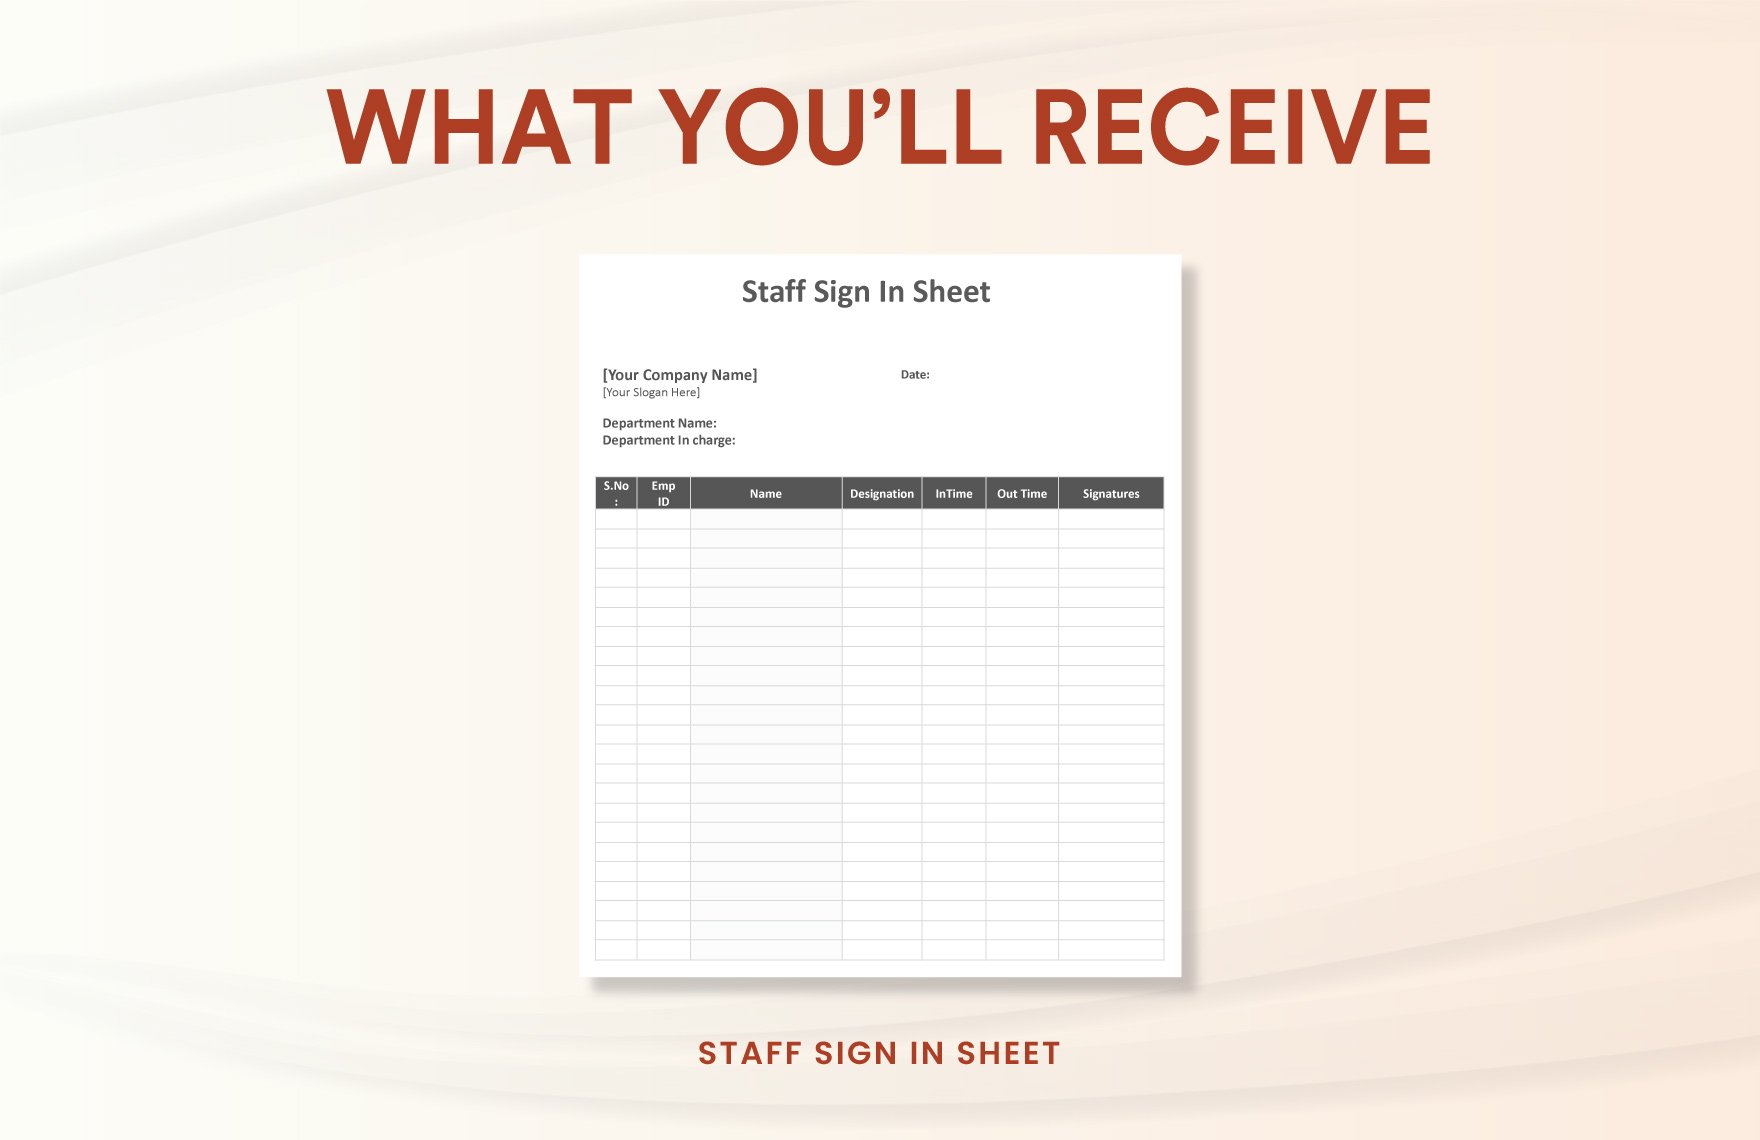 Staff Sign in Sheet Template